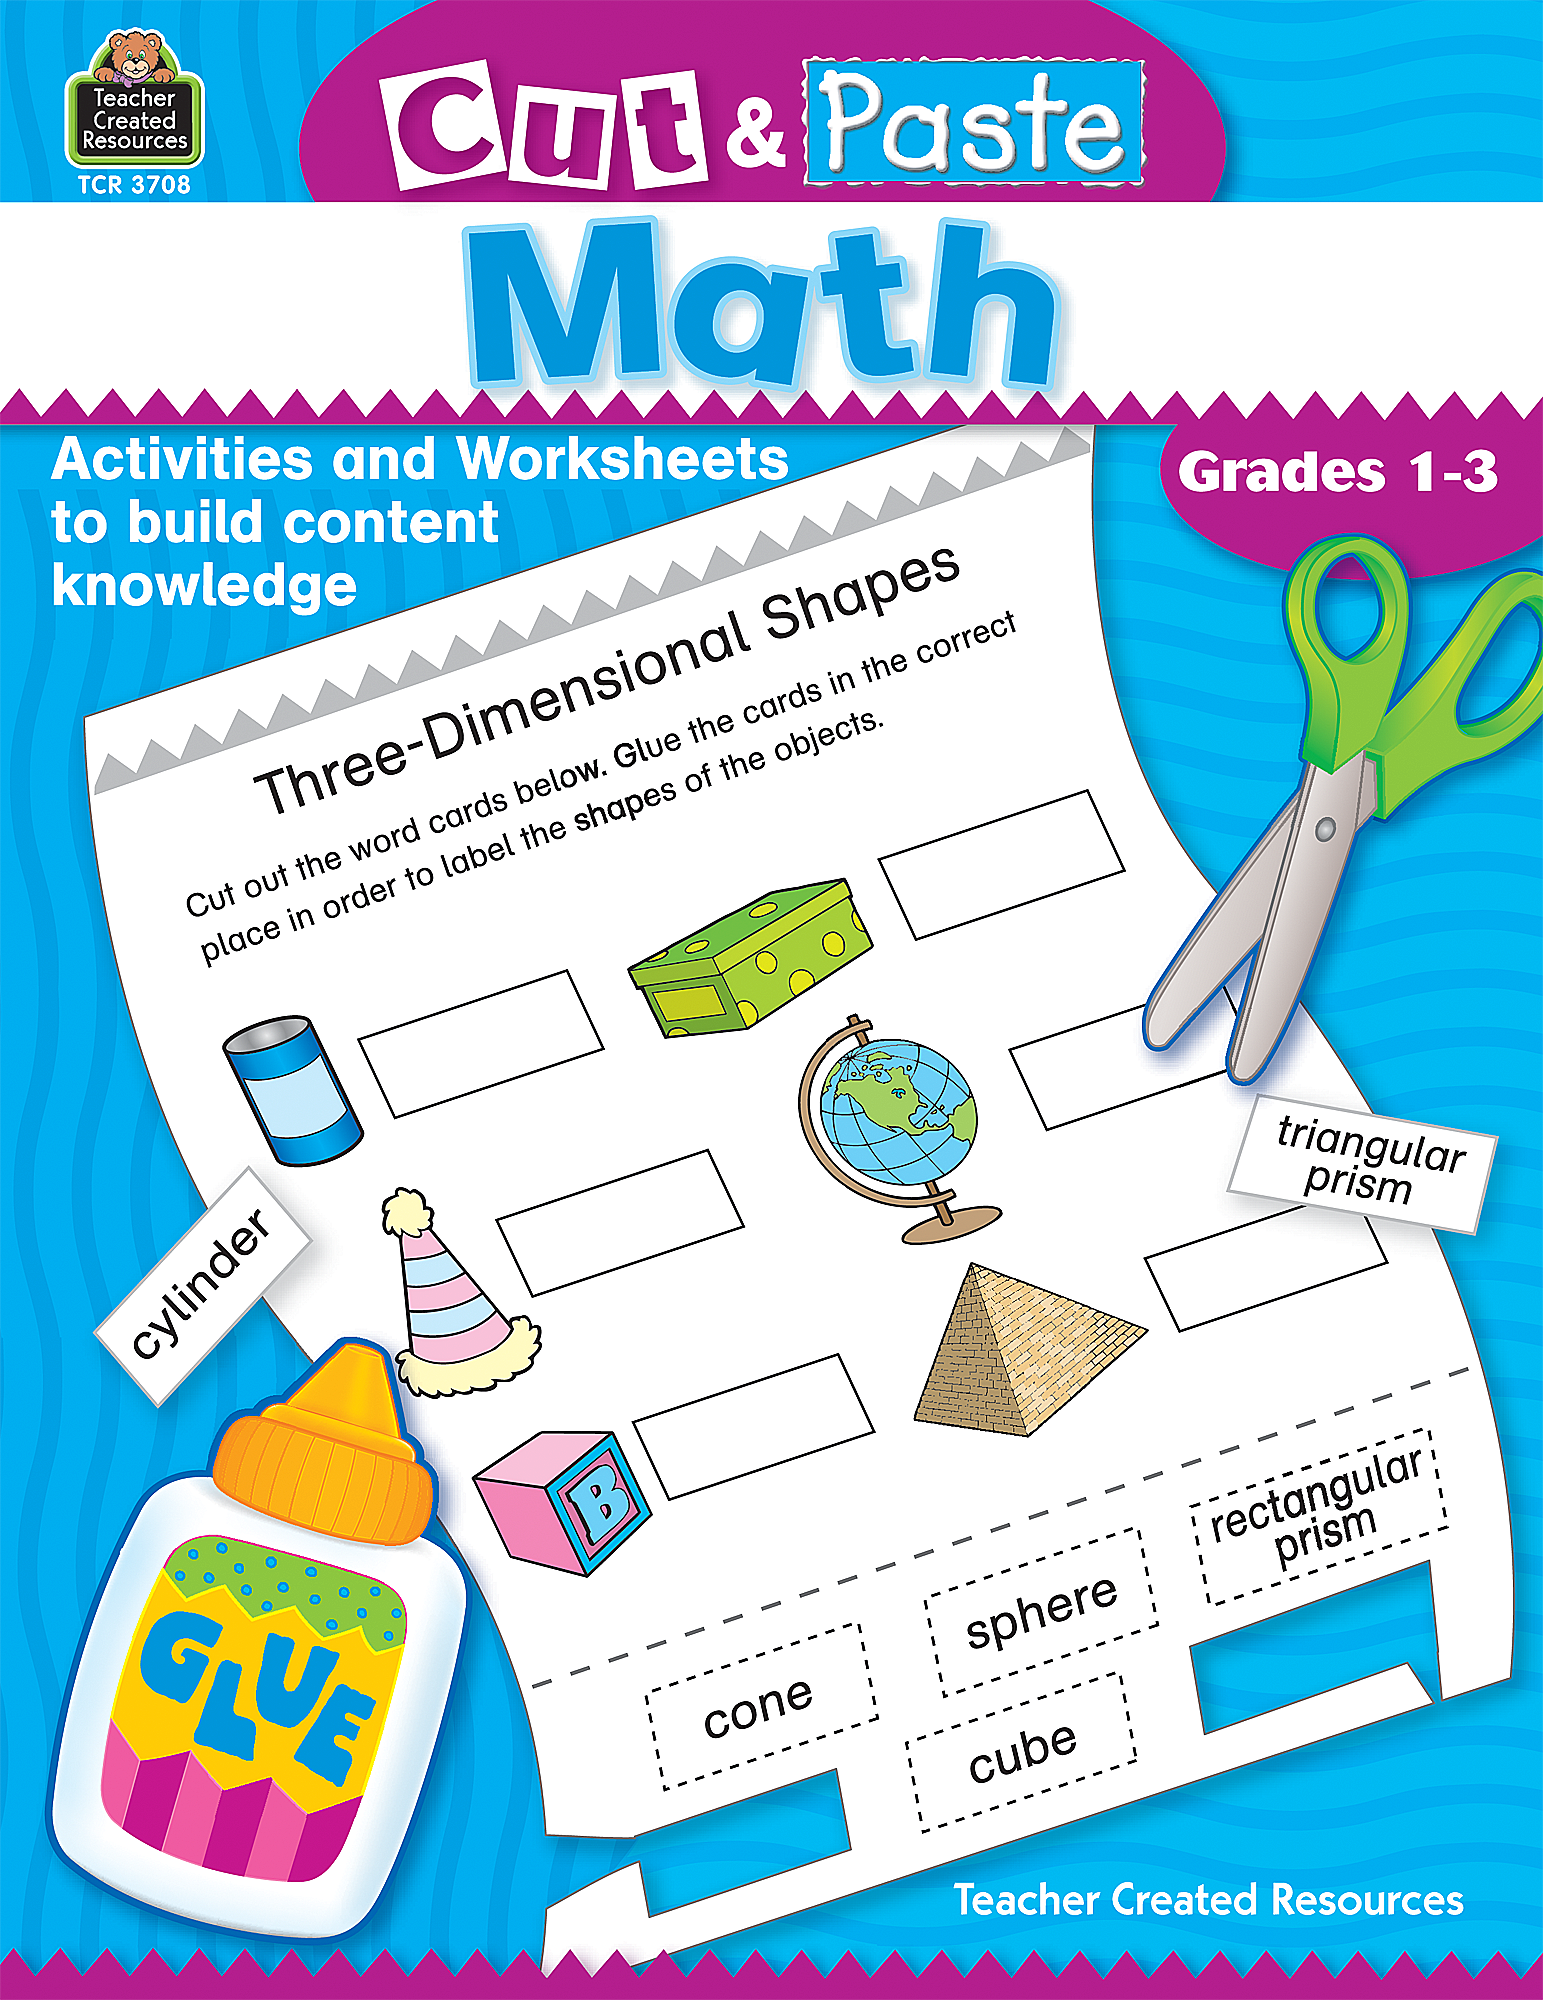 cut-and-paste-math-tcr3708-teacher-created-resources